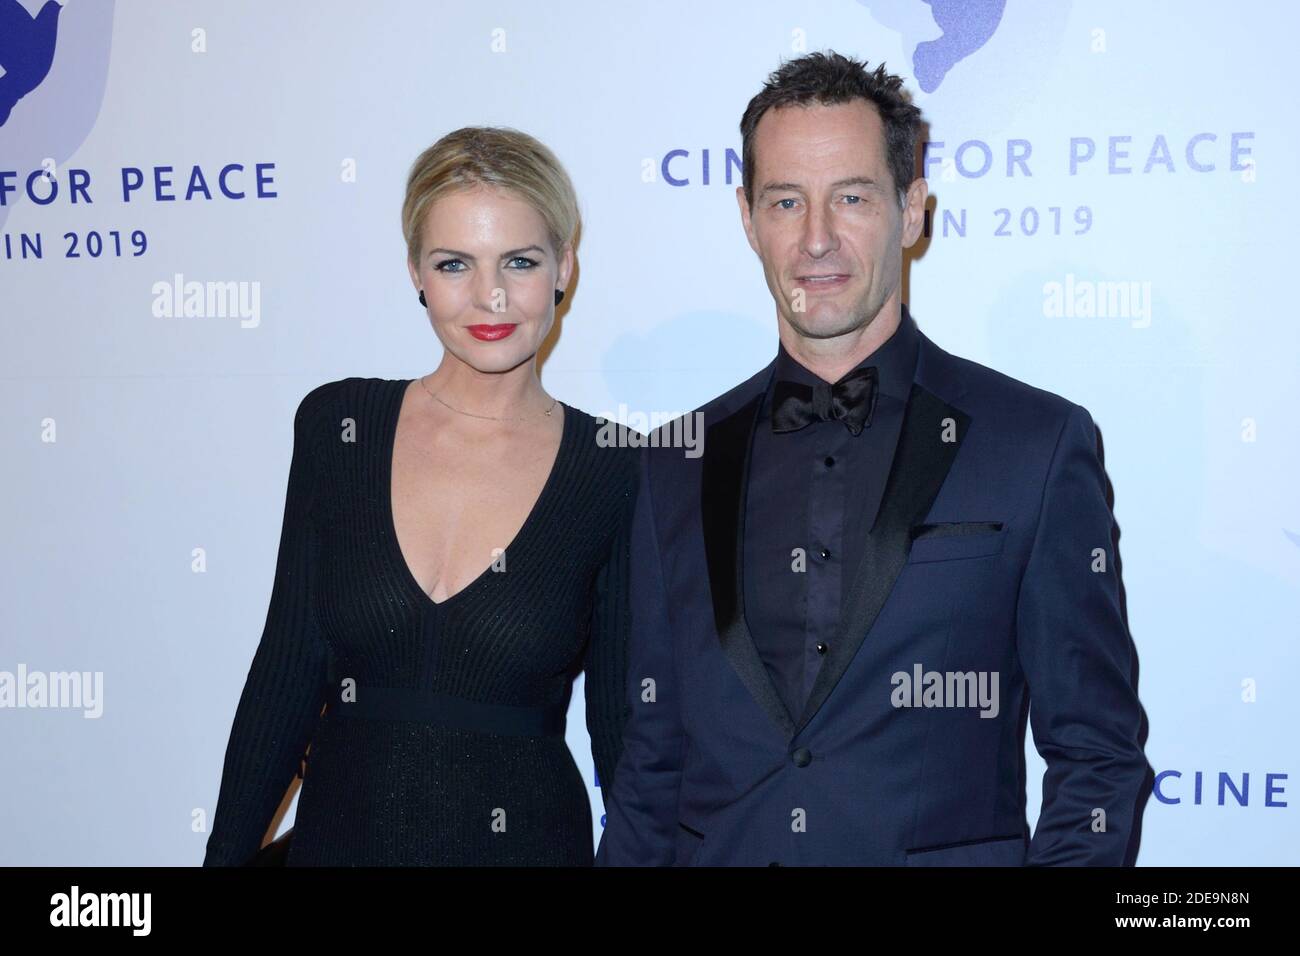 Sebastian Copeland and his wife Carolin Copeland attending the Cinema For Peace Gala in Berlin, Germany on February 11, 2019. Photo by Aurore Marechal/ABACAPRESS.COM Stock Photo